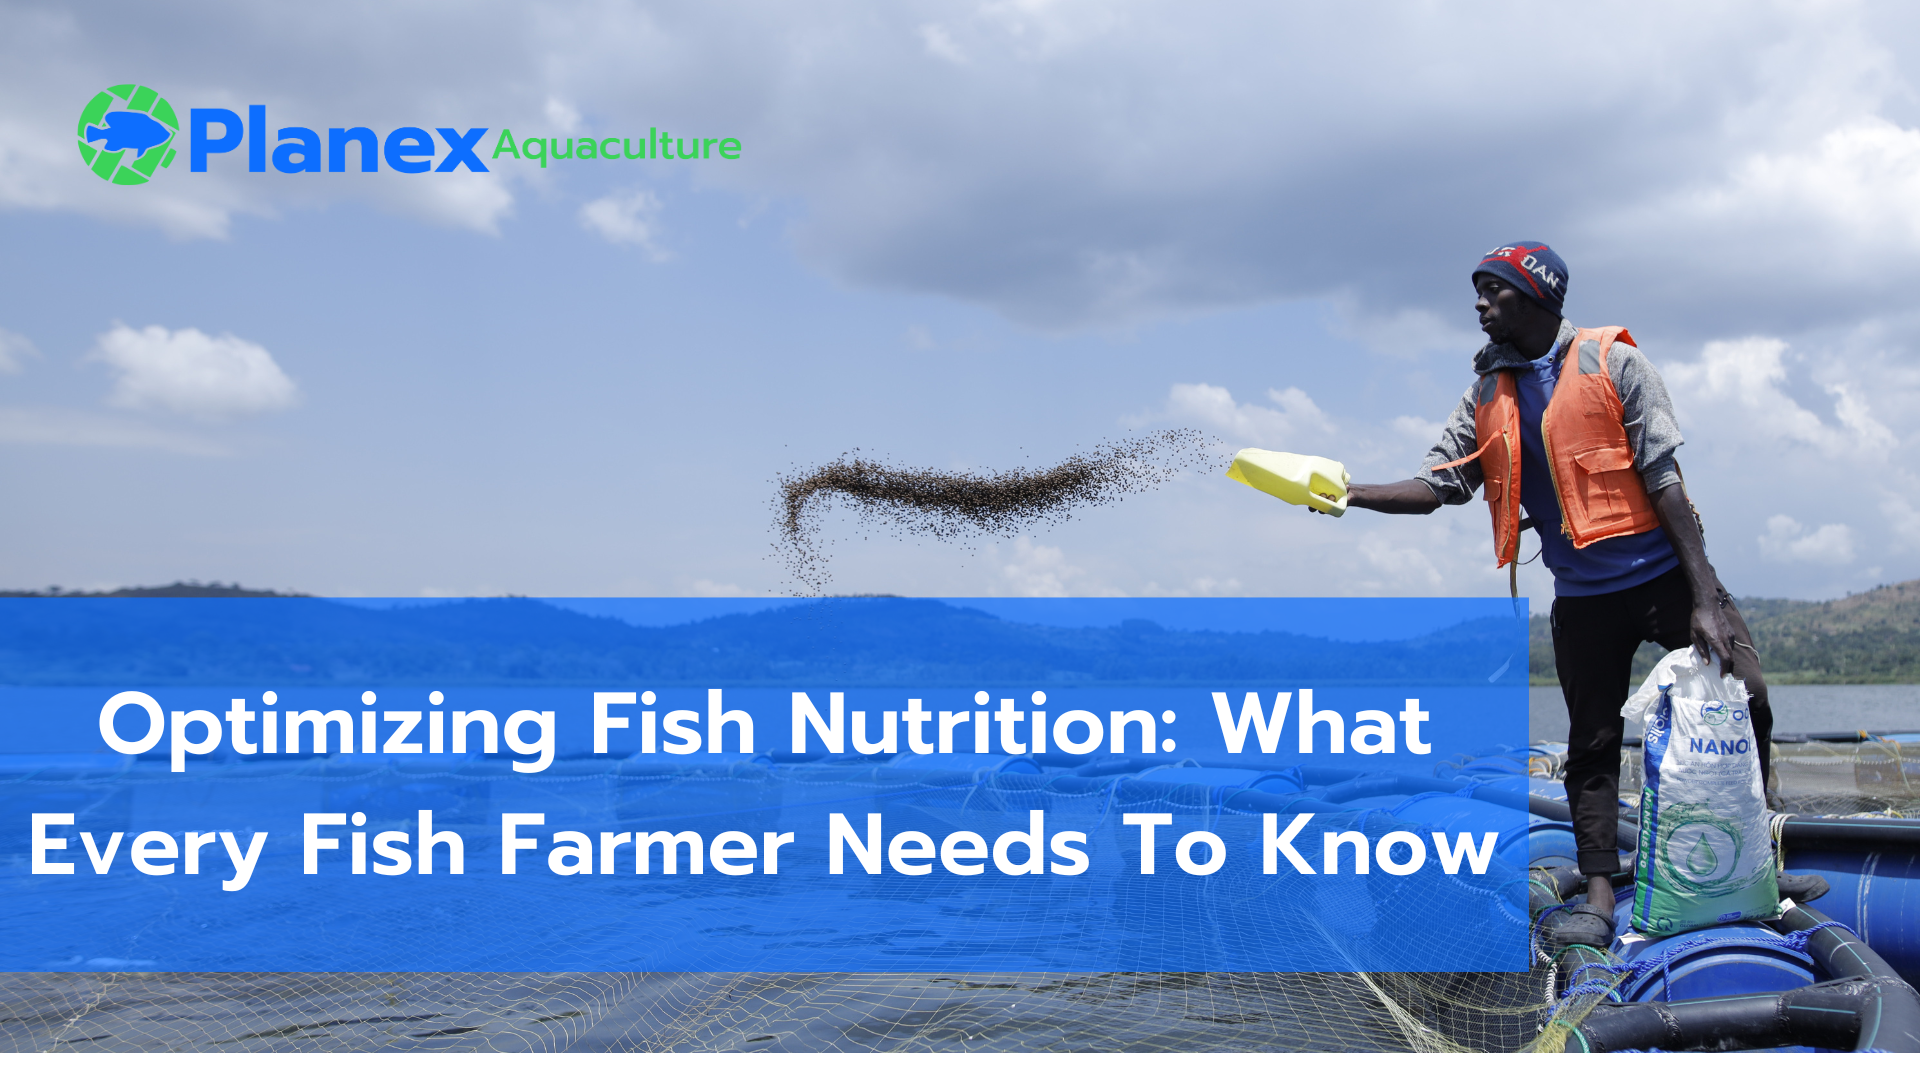 Optimizing Fish Nutrition: What Every Fish Farmer Needs To Know